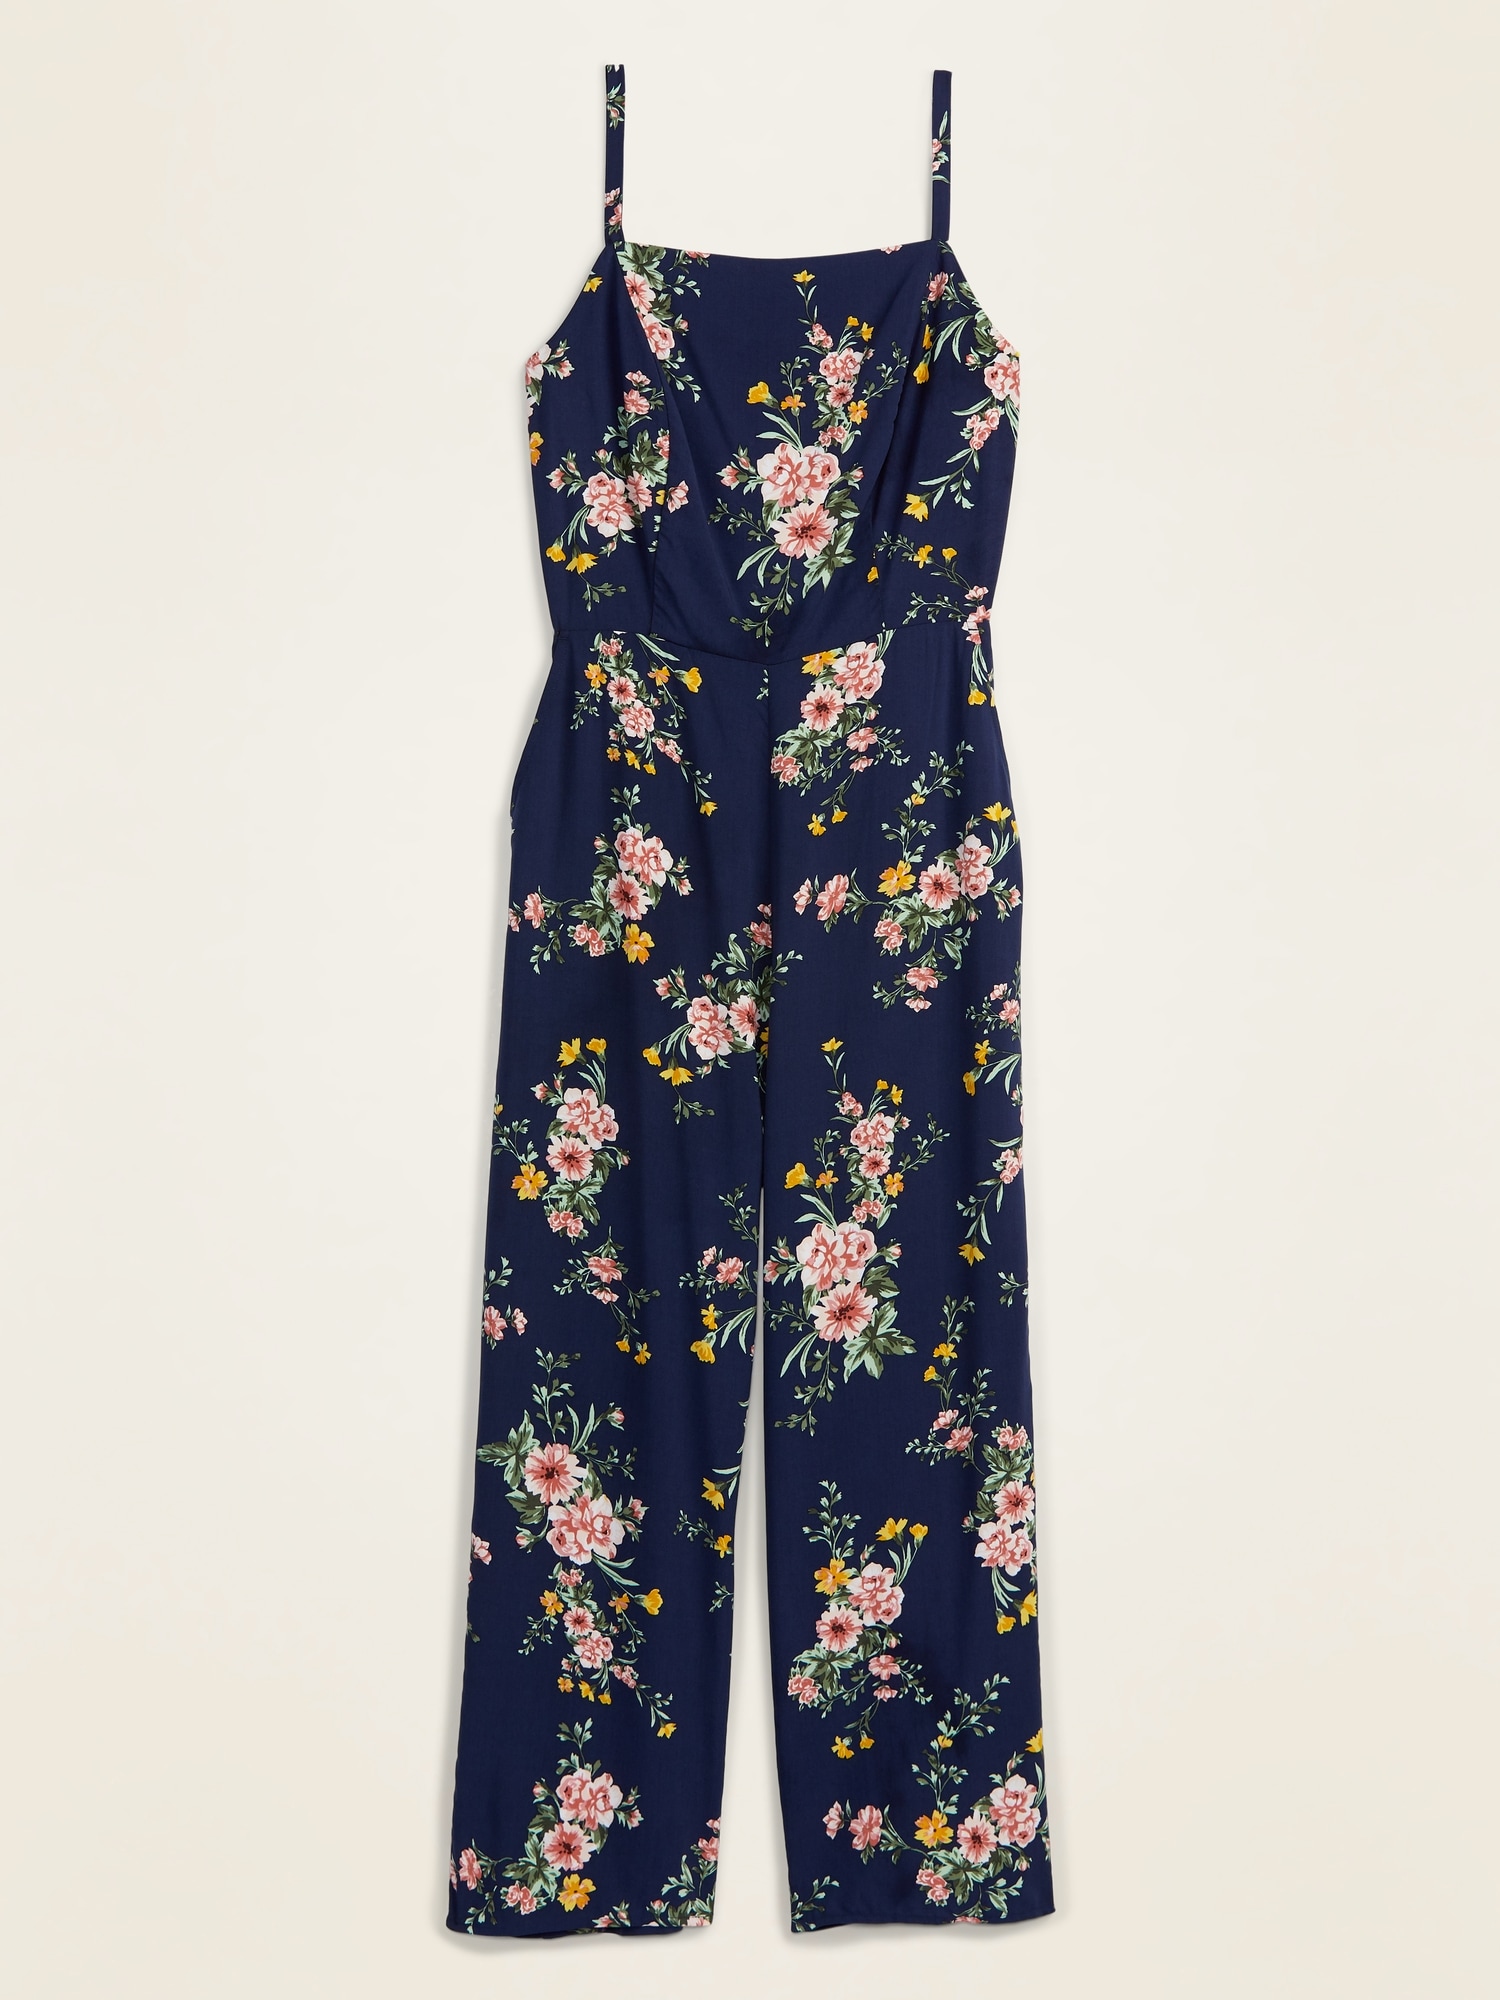 Square-Neck Cami Jumpsuit for Women | Old Navy